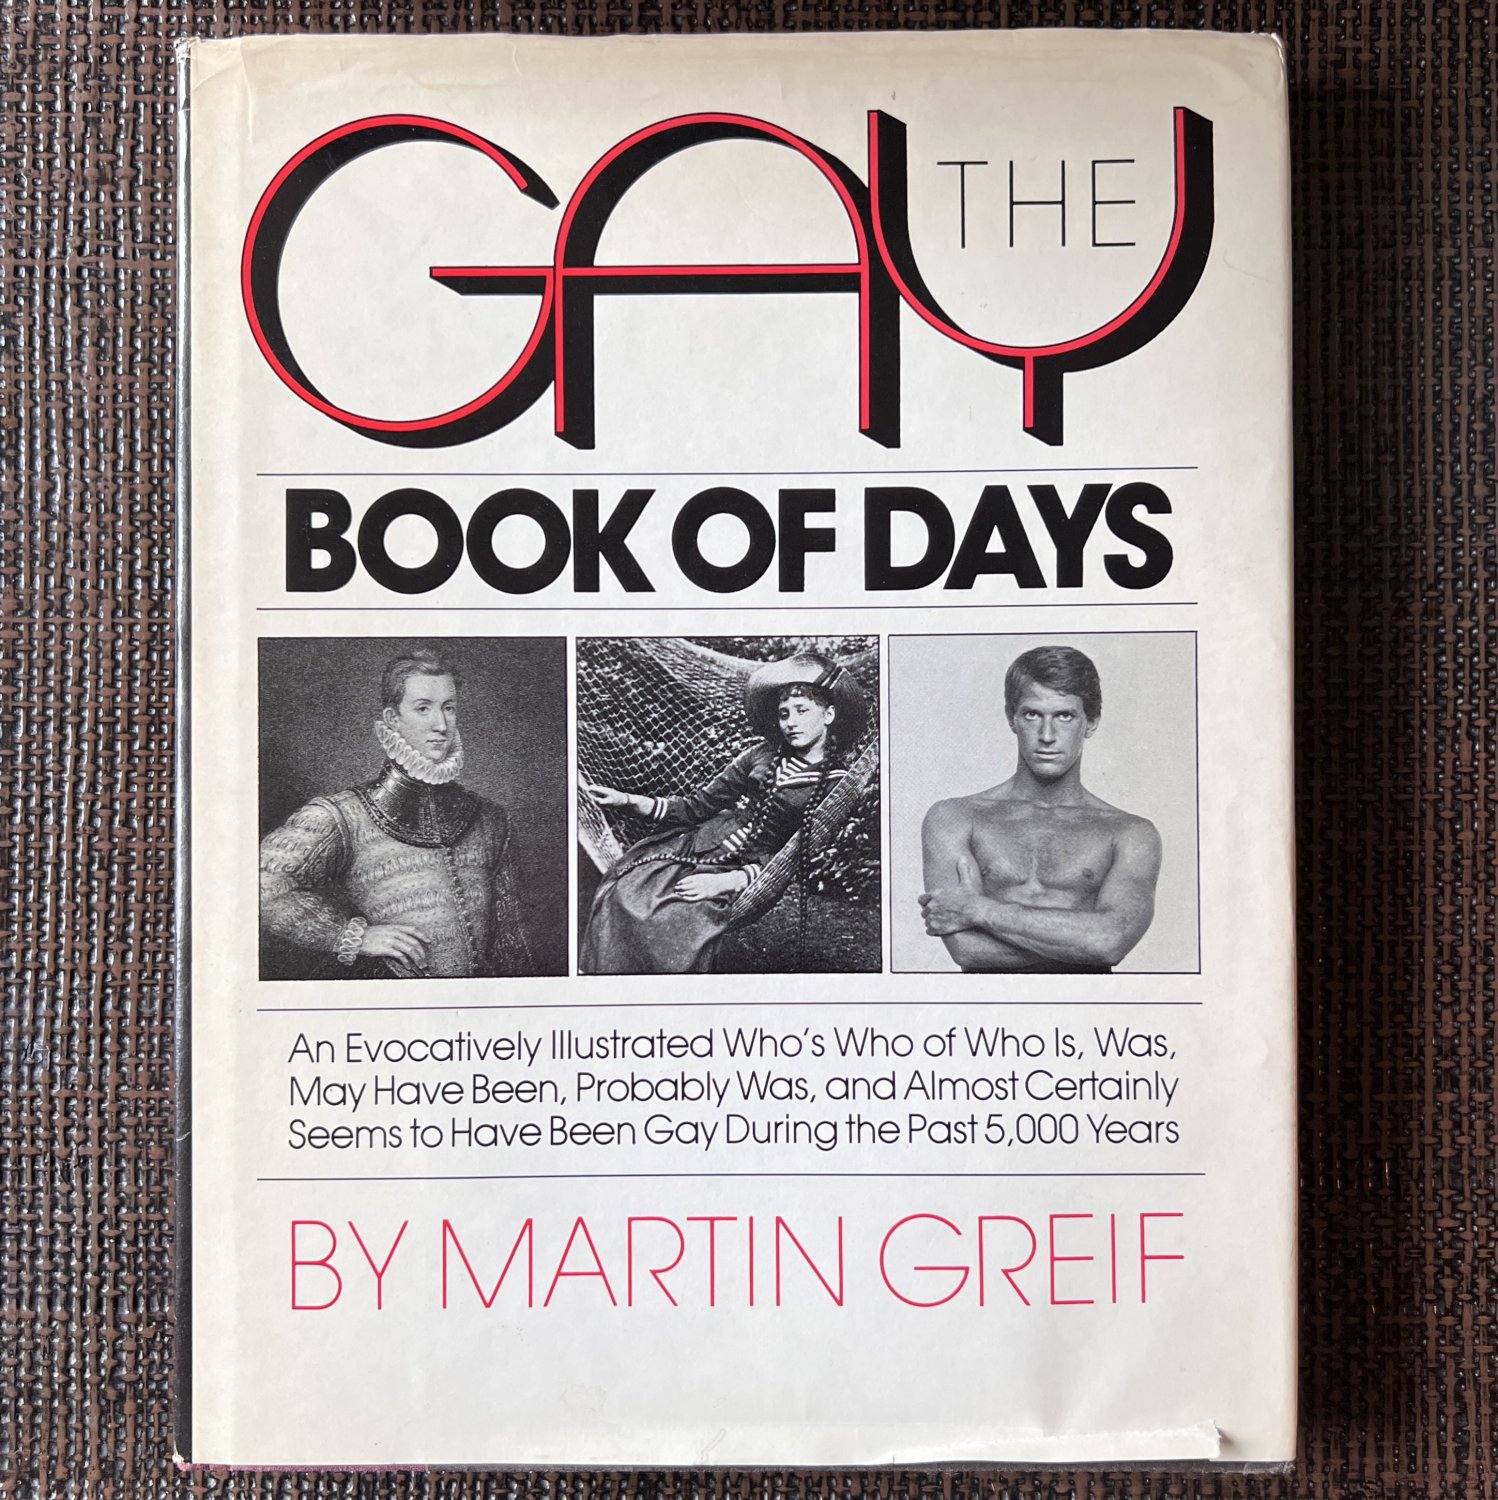 THE GAY BOOK OF DAYS (1989) Martin Greif Gay Male History Queer LGBT Homosexual Photos